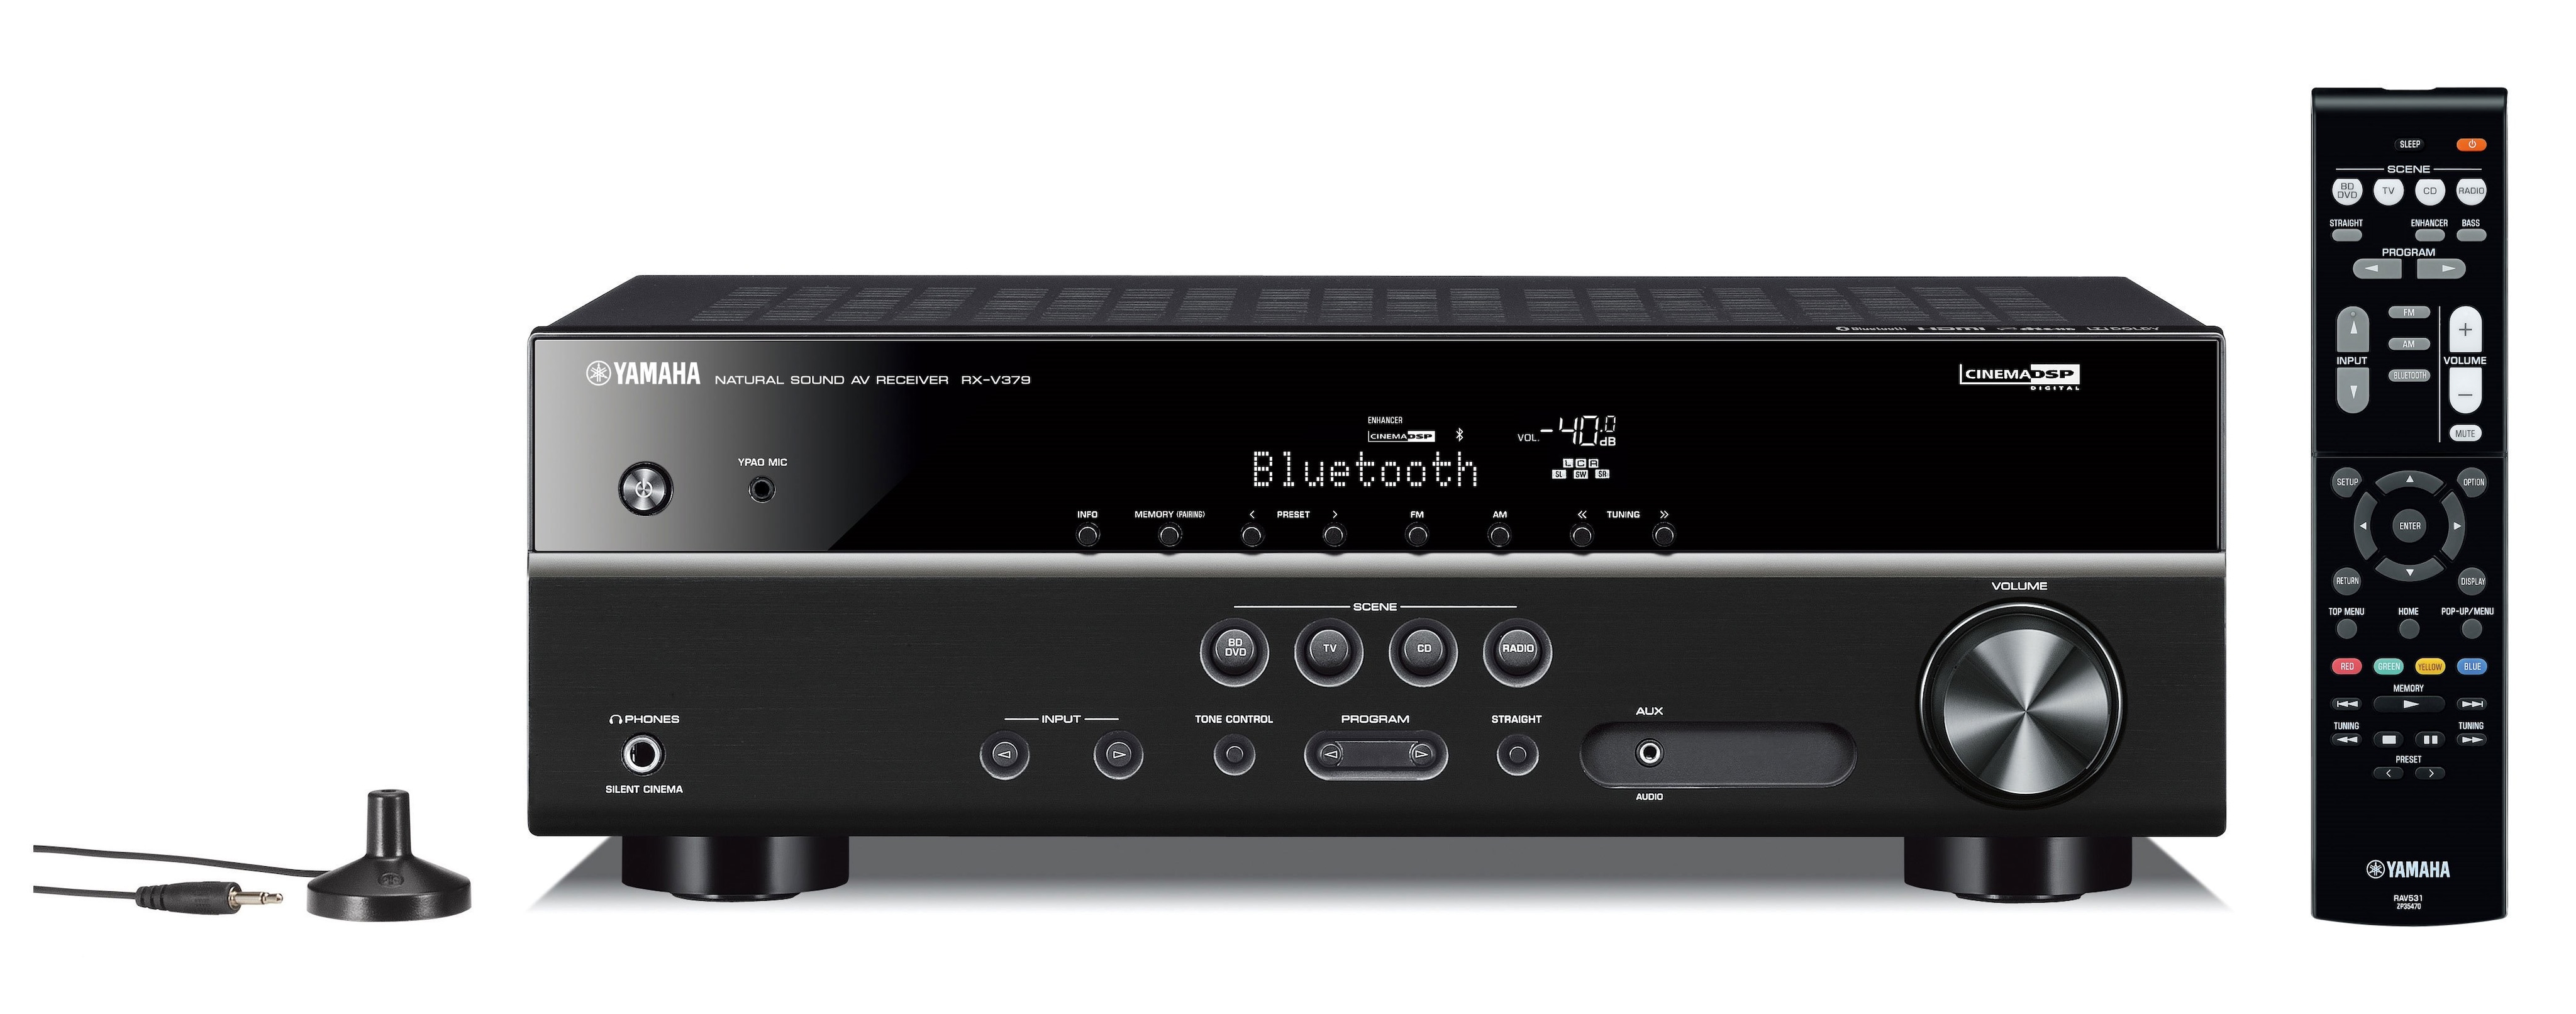 Htr 3068 Overview Av Receivers Audio And Visual Products Yamaha